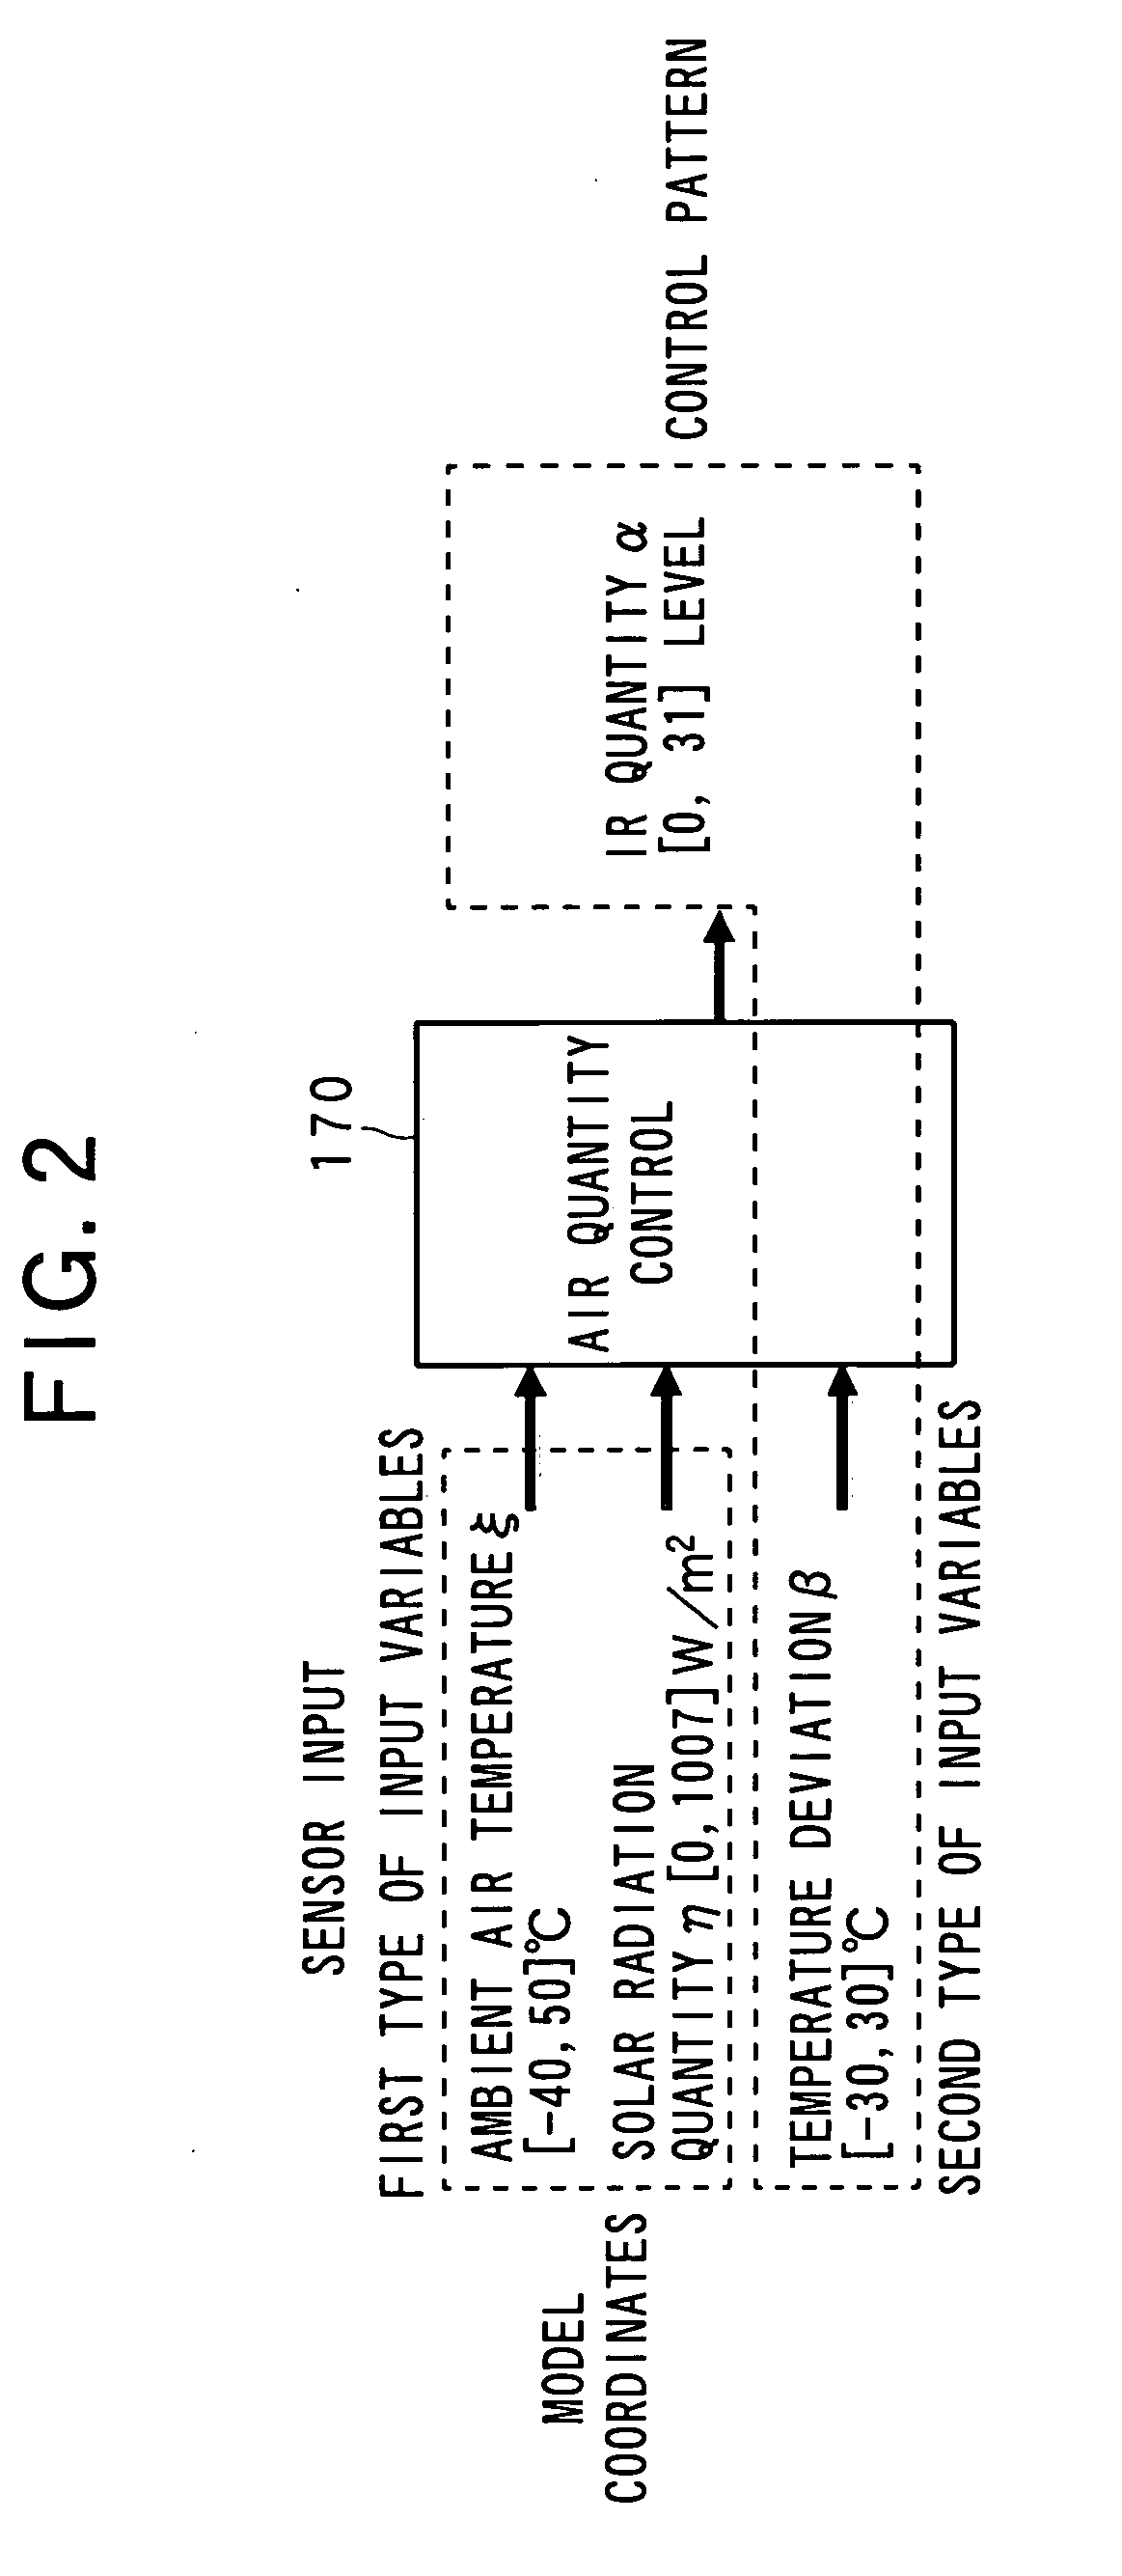 Method and device for controlling equipment based on multiple-input/one-output control